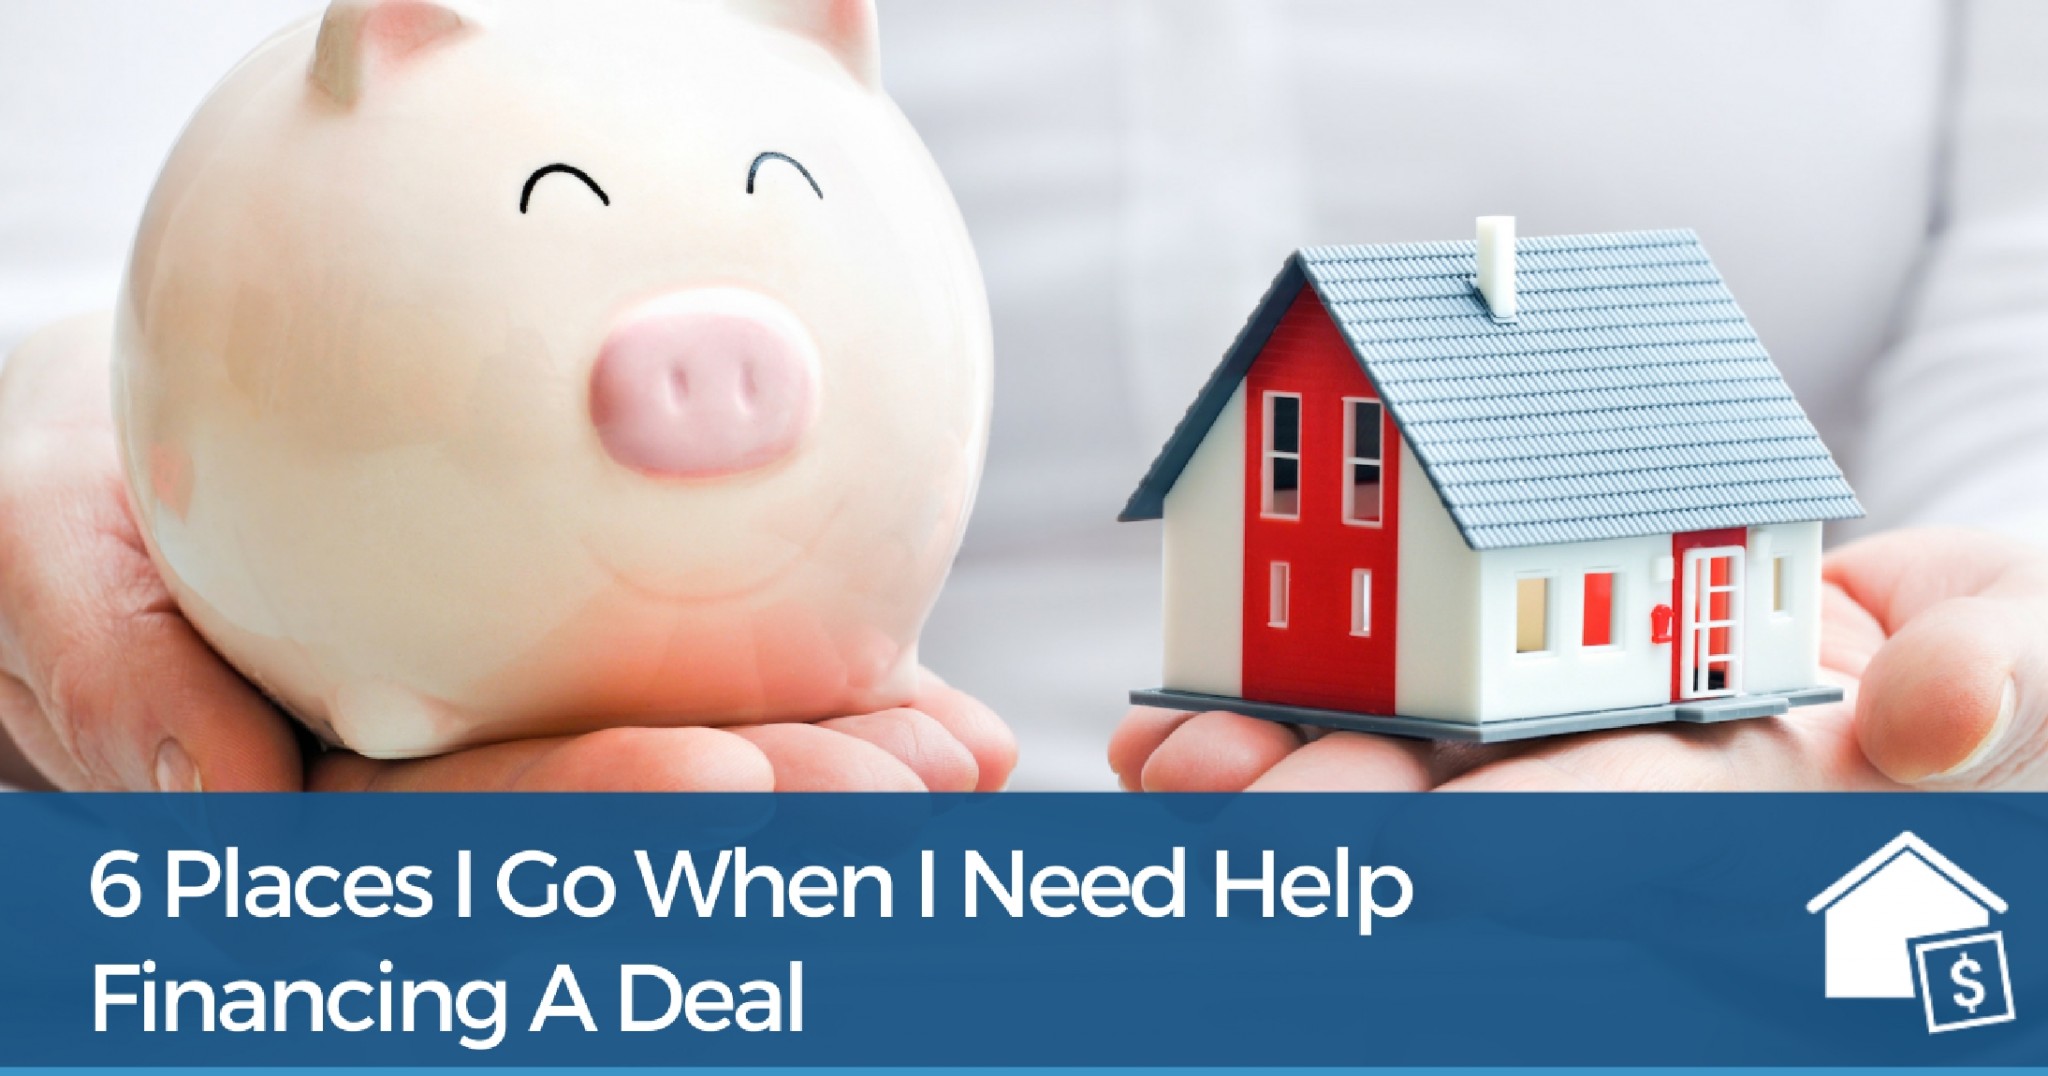 6 Places I Go When I Need Help Financing A Deal